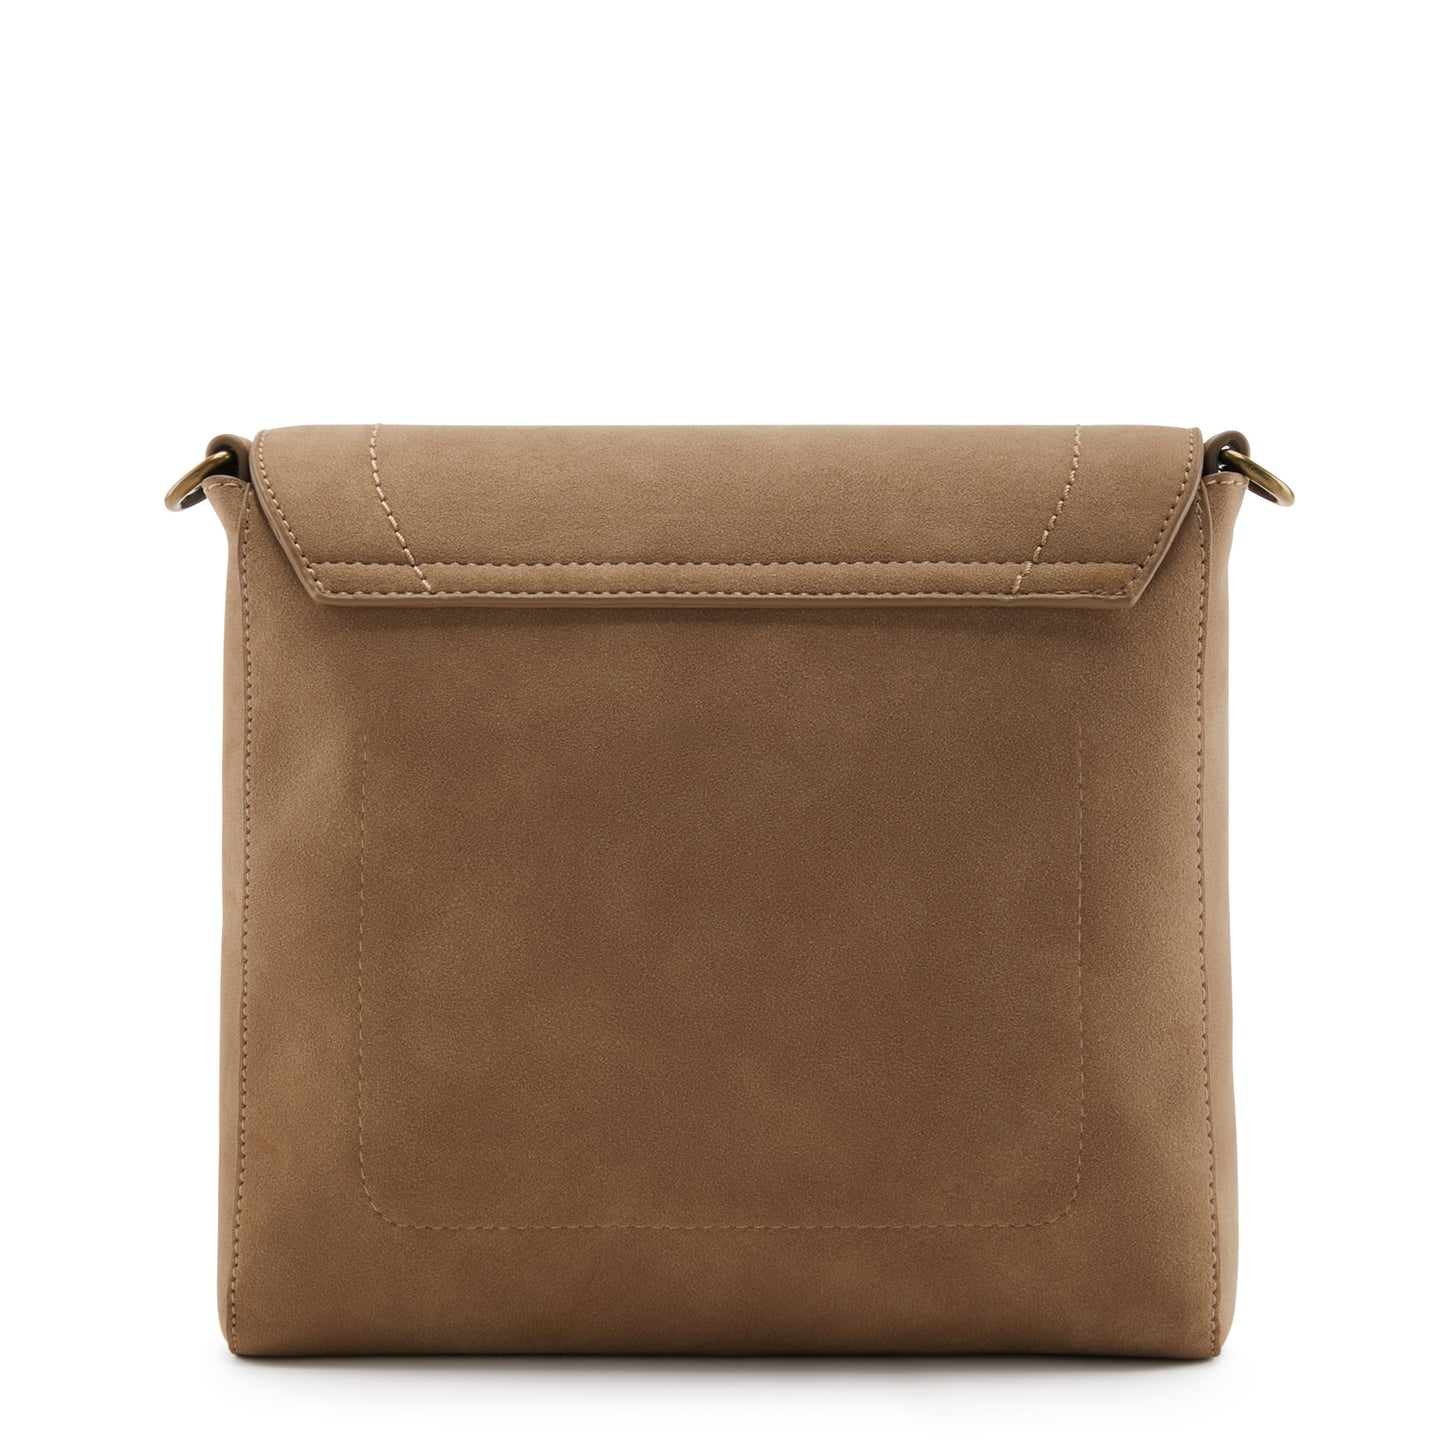 My Daily taupe crossbody bag